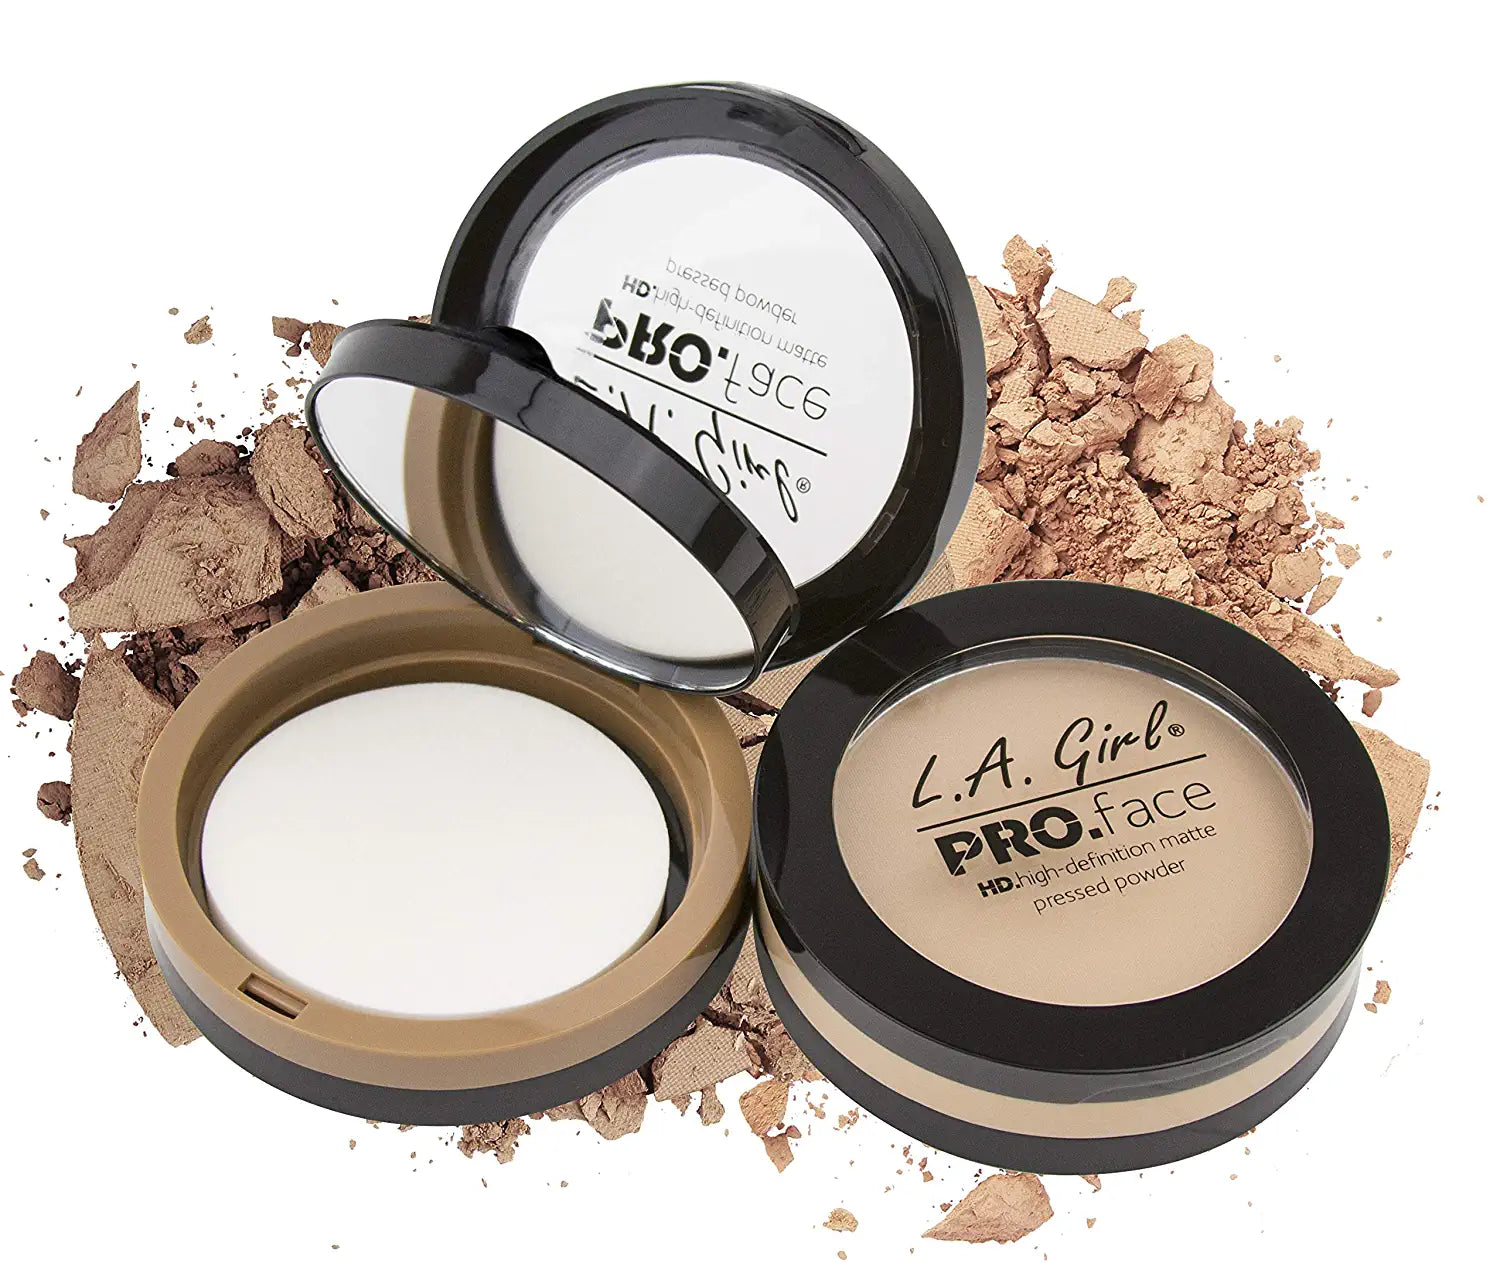 L.A. Girl Pro Face HD Matte Pressed Powder - VIP Extensions